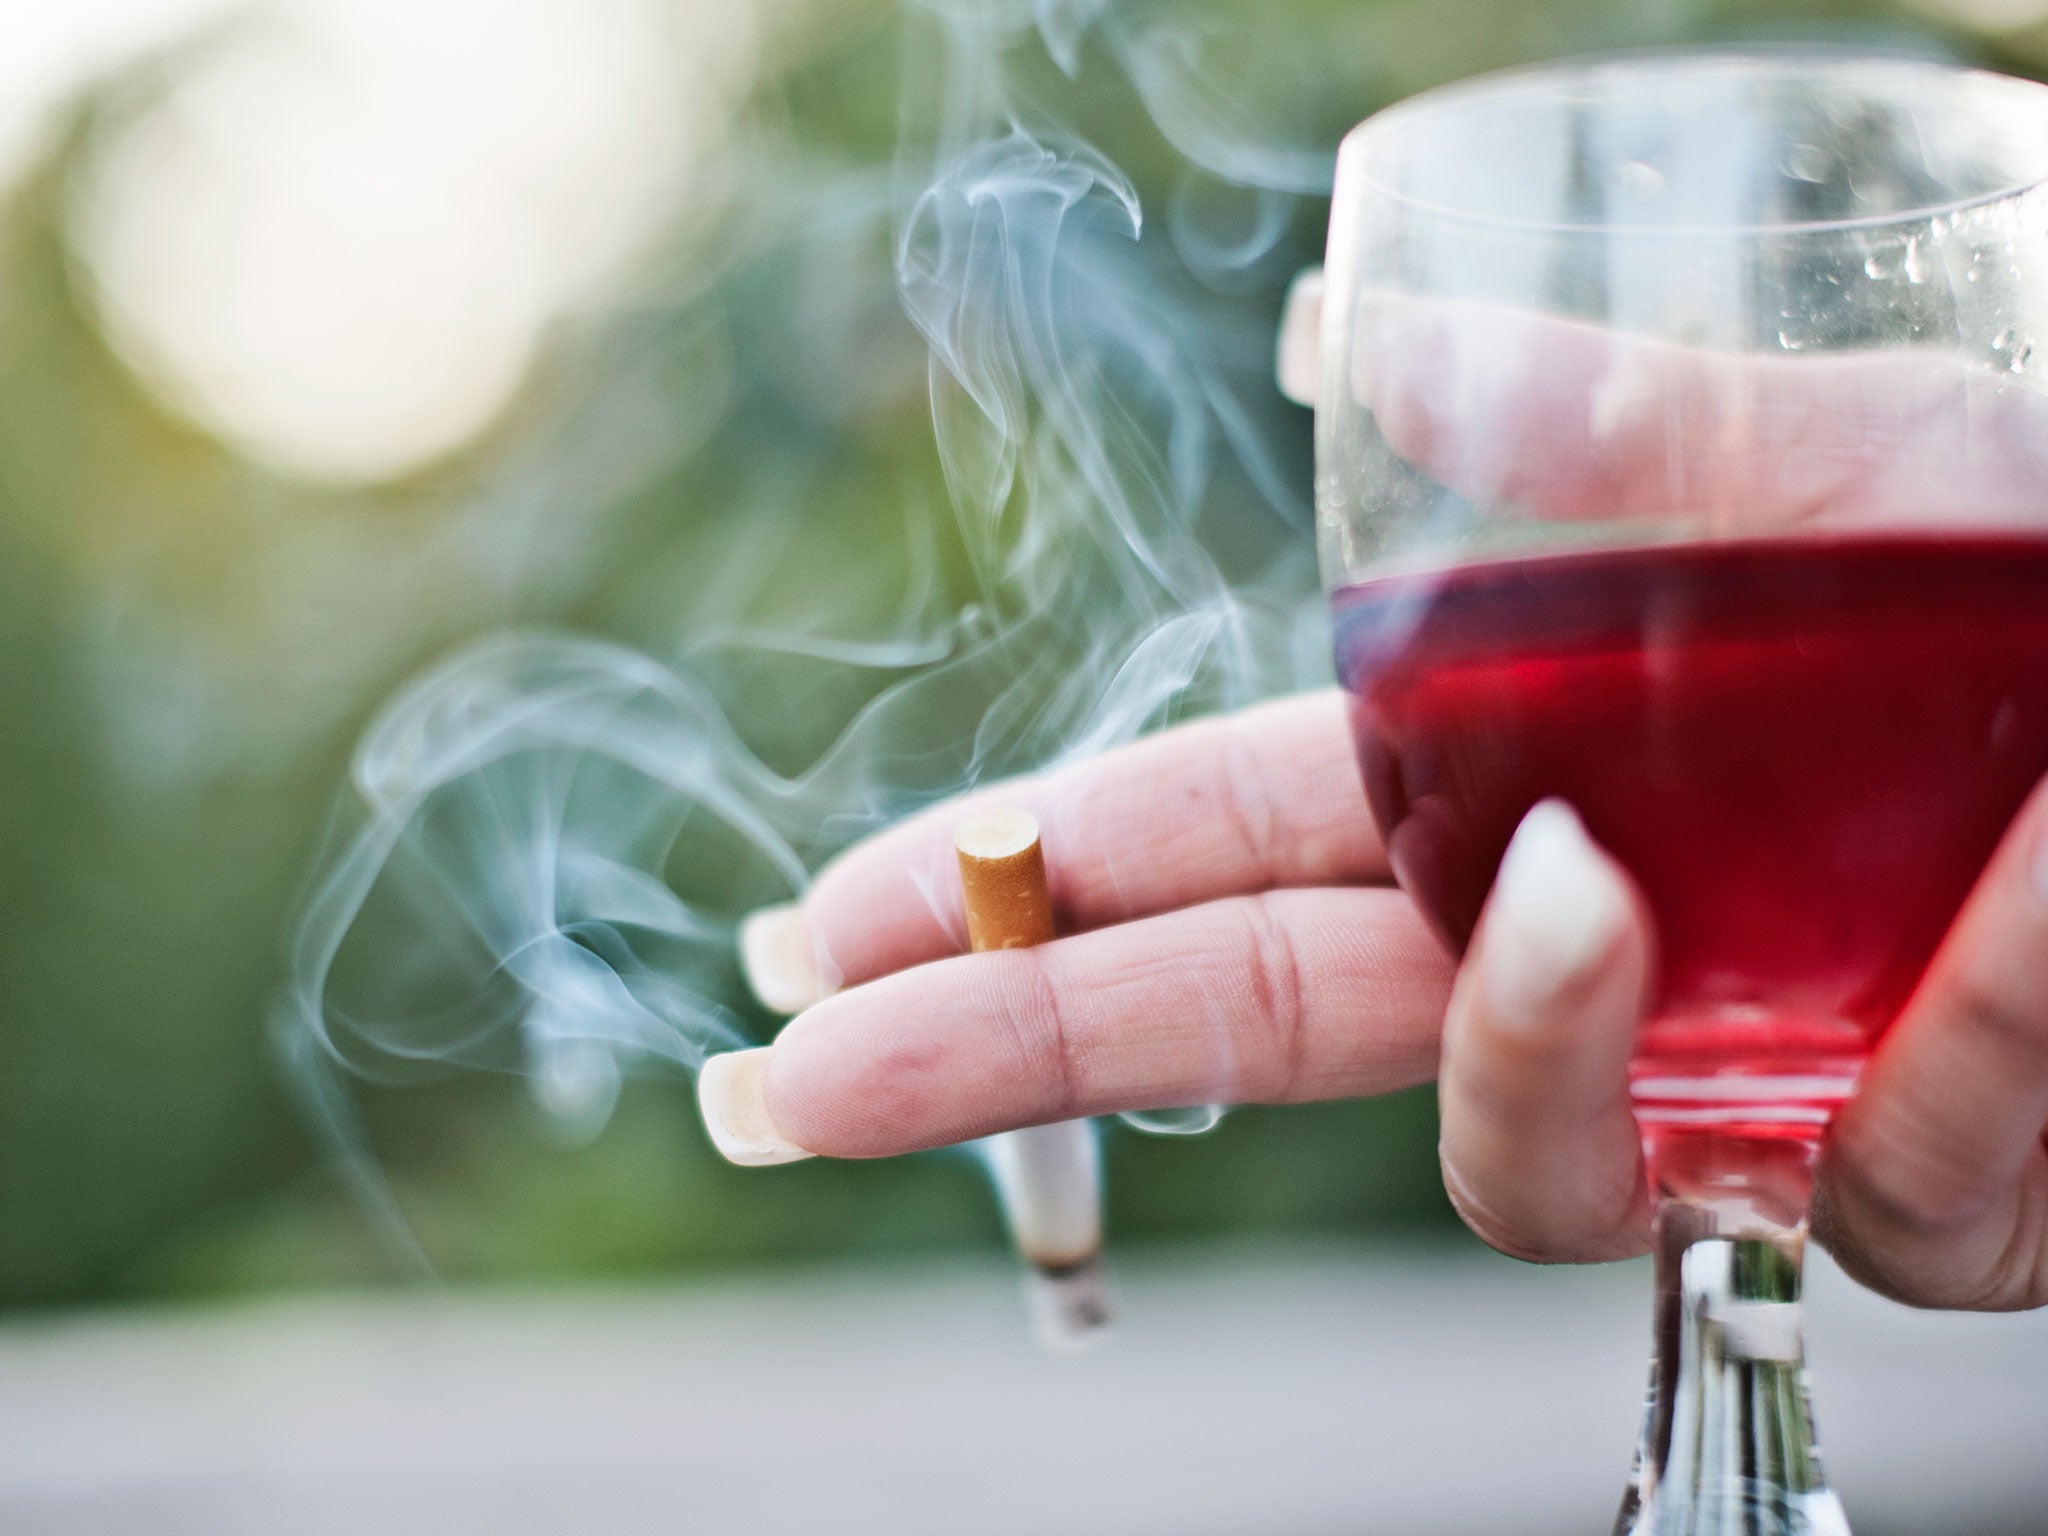 A report has concluded that Britian is the worst place in the EU to be a smoker and drink wine